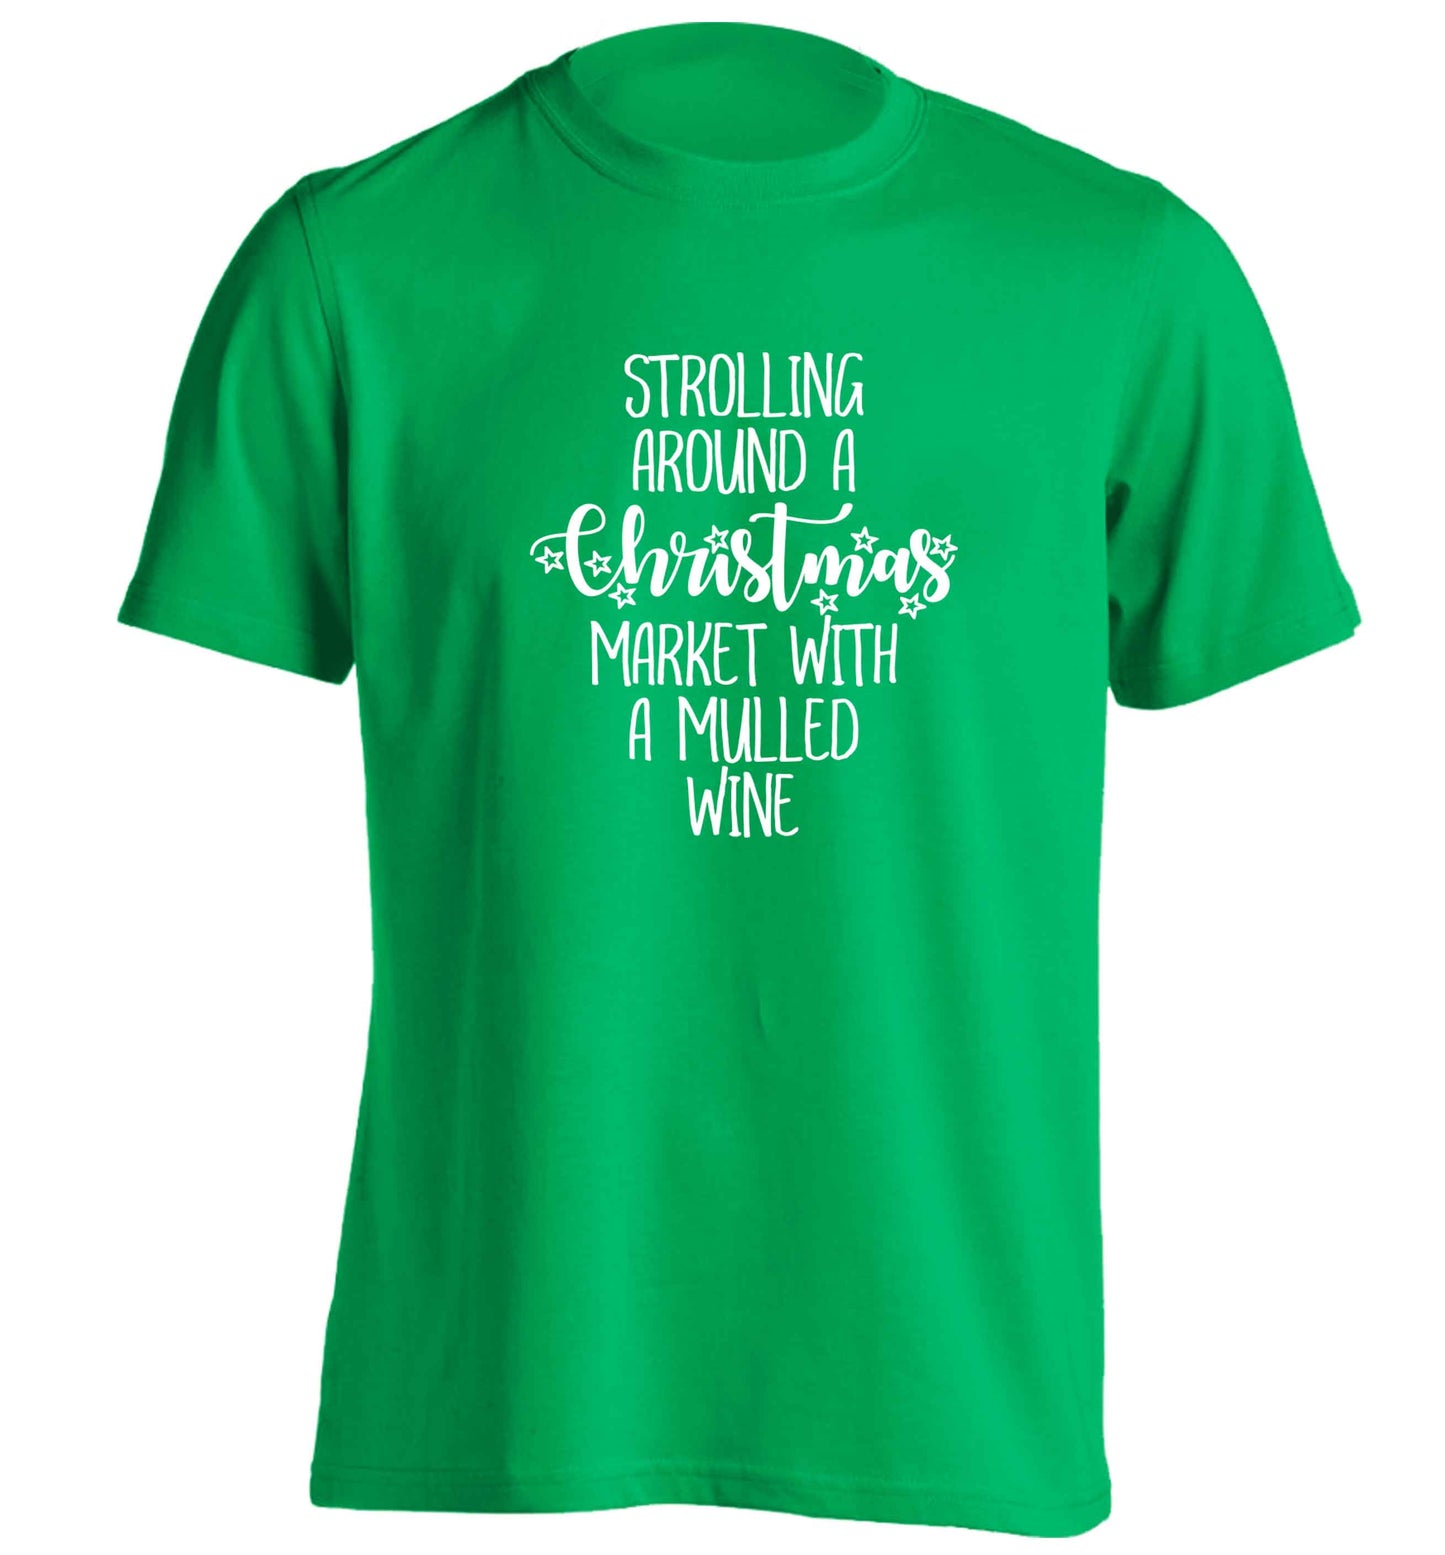 Strolling around a Christmas market with mulled wine adults unisex green Tshirt 2XL